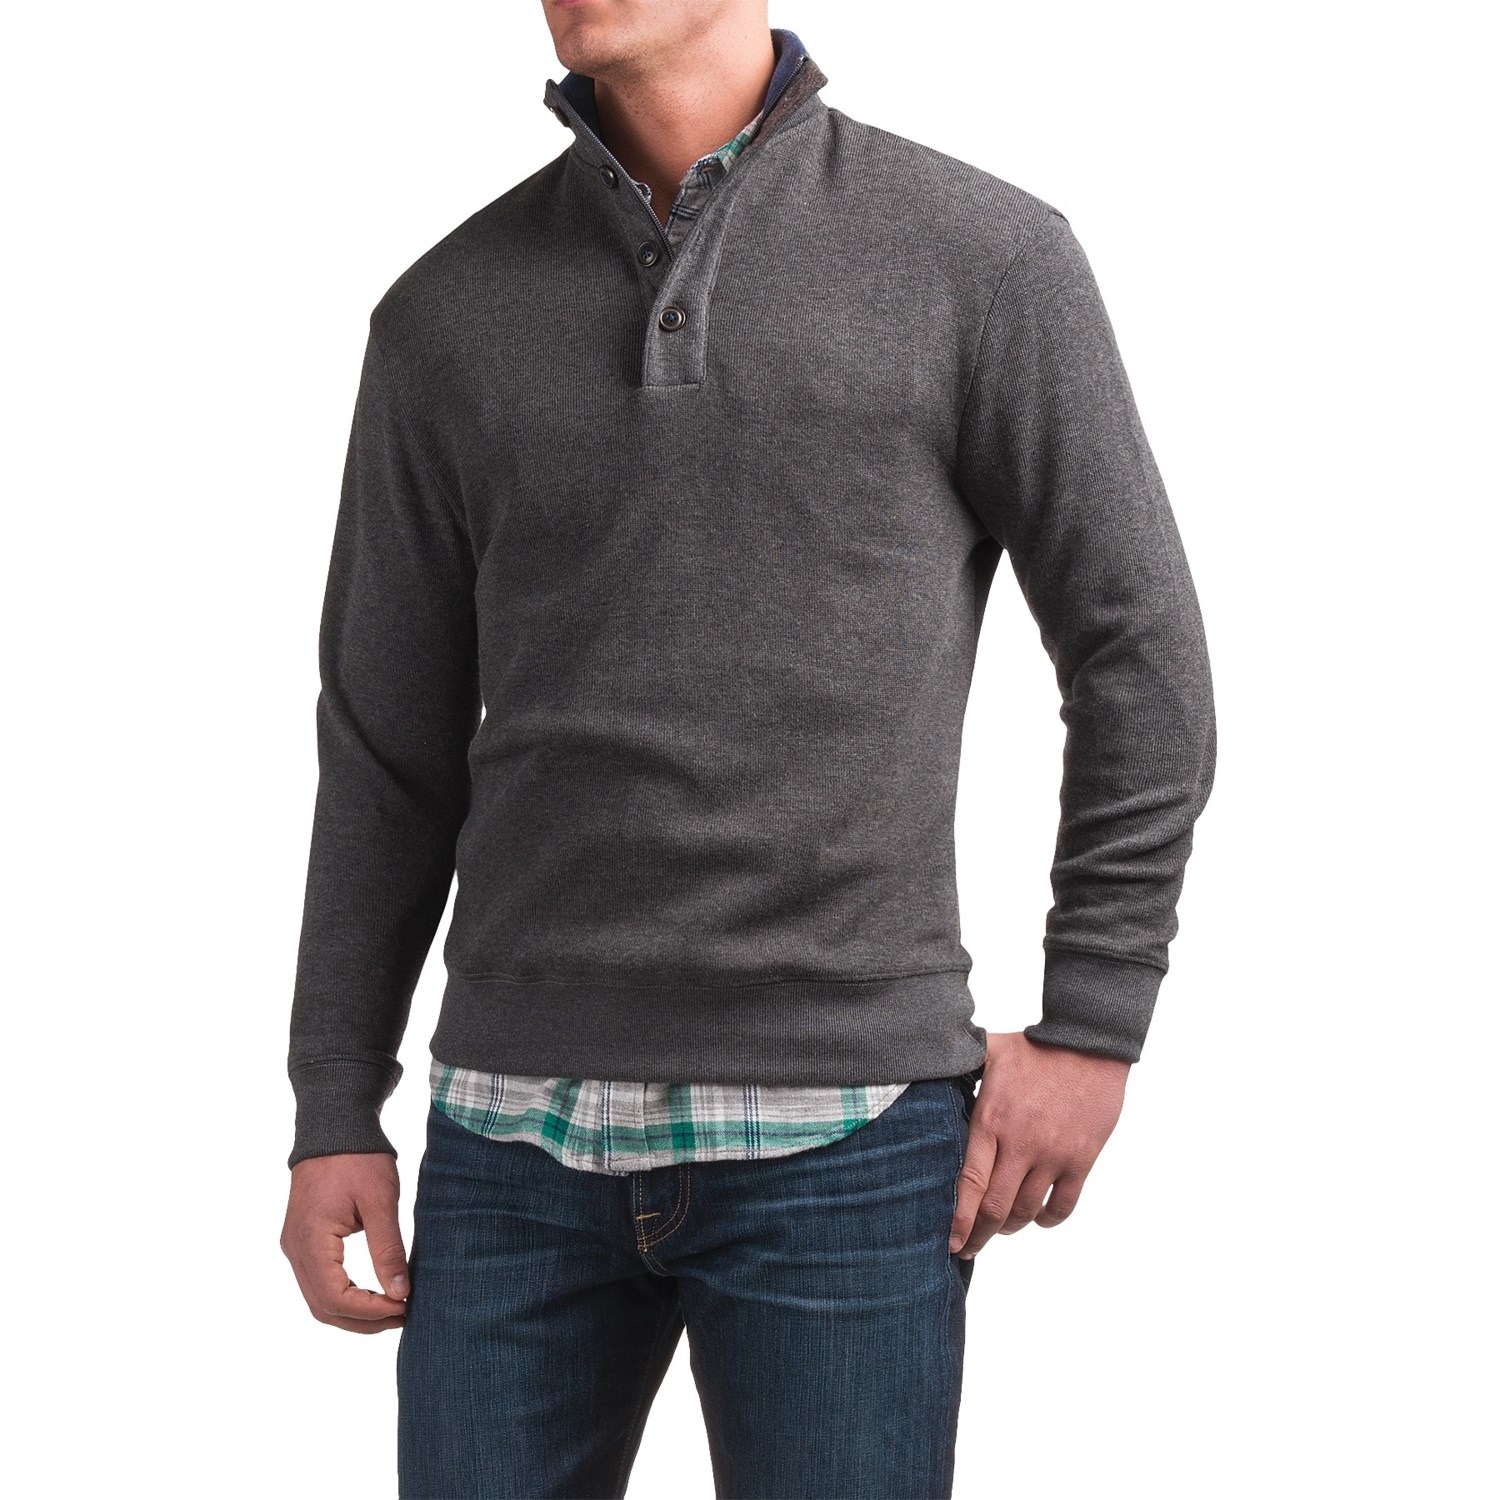 Viyella Zip and Button Mock Neck Sweater (For Men) - Save 63%